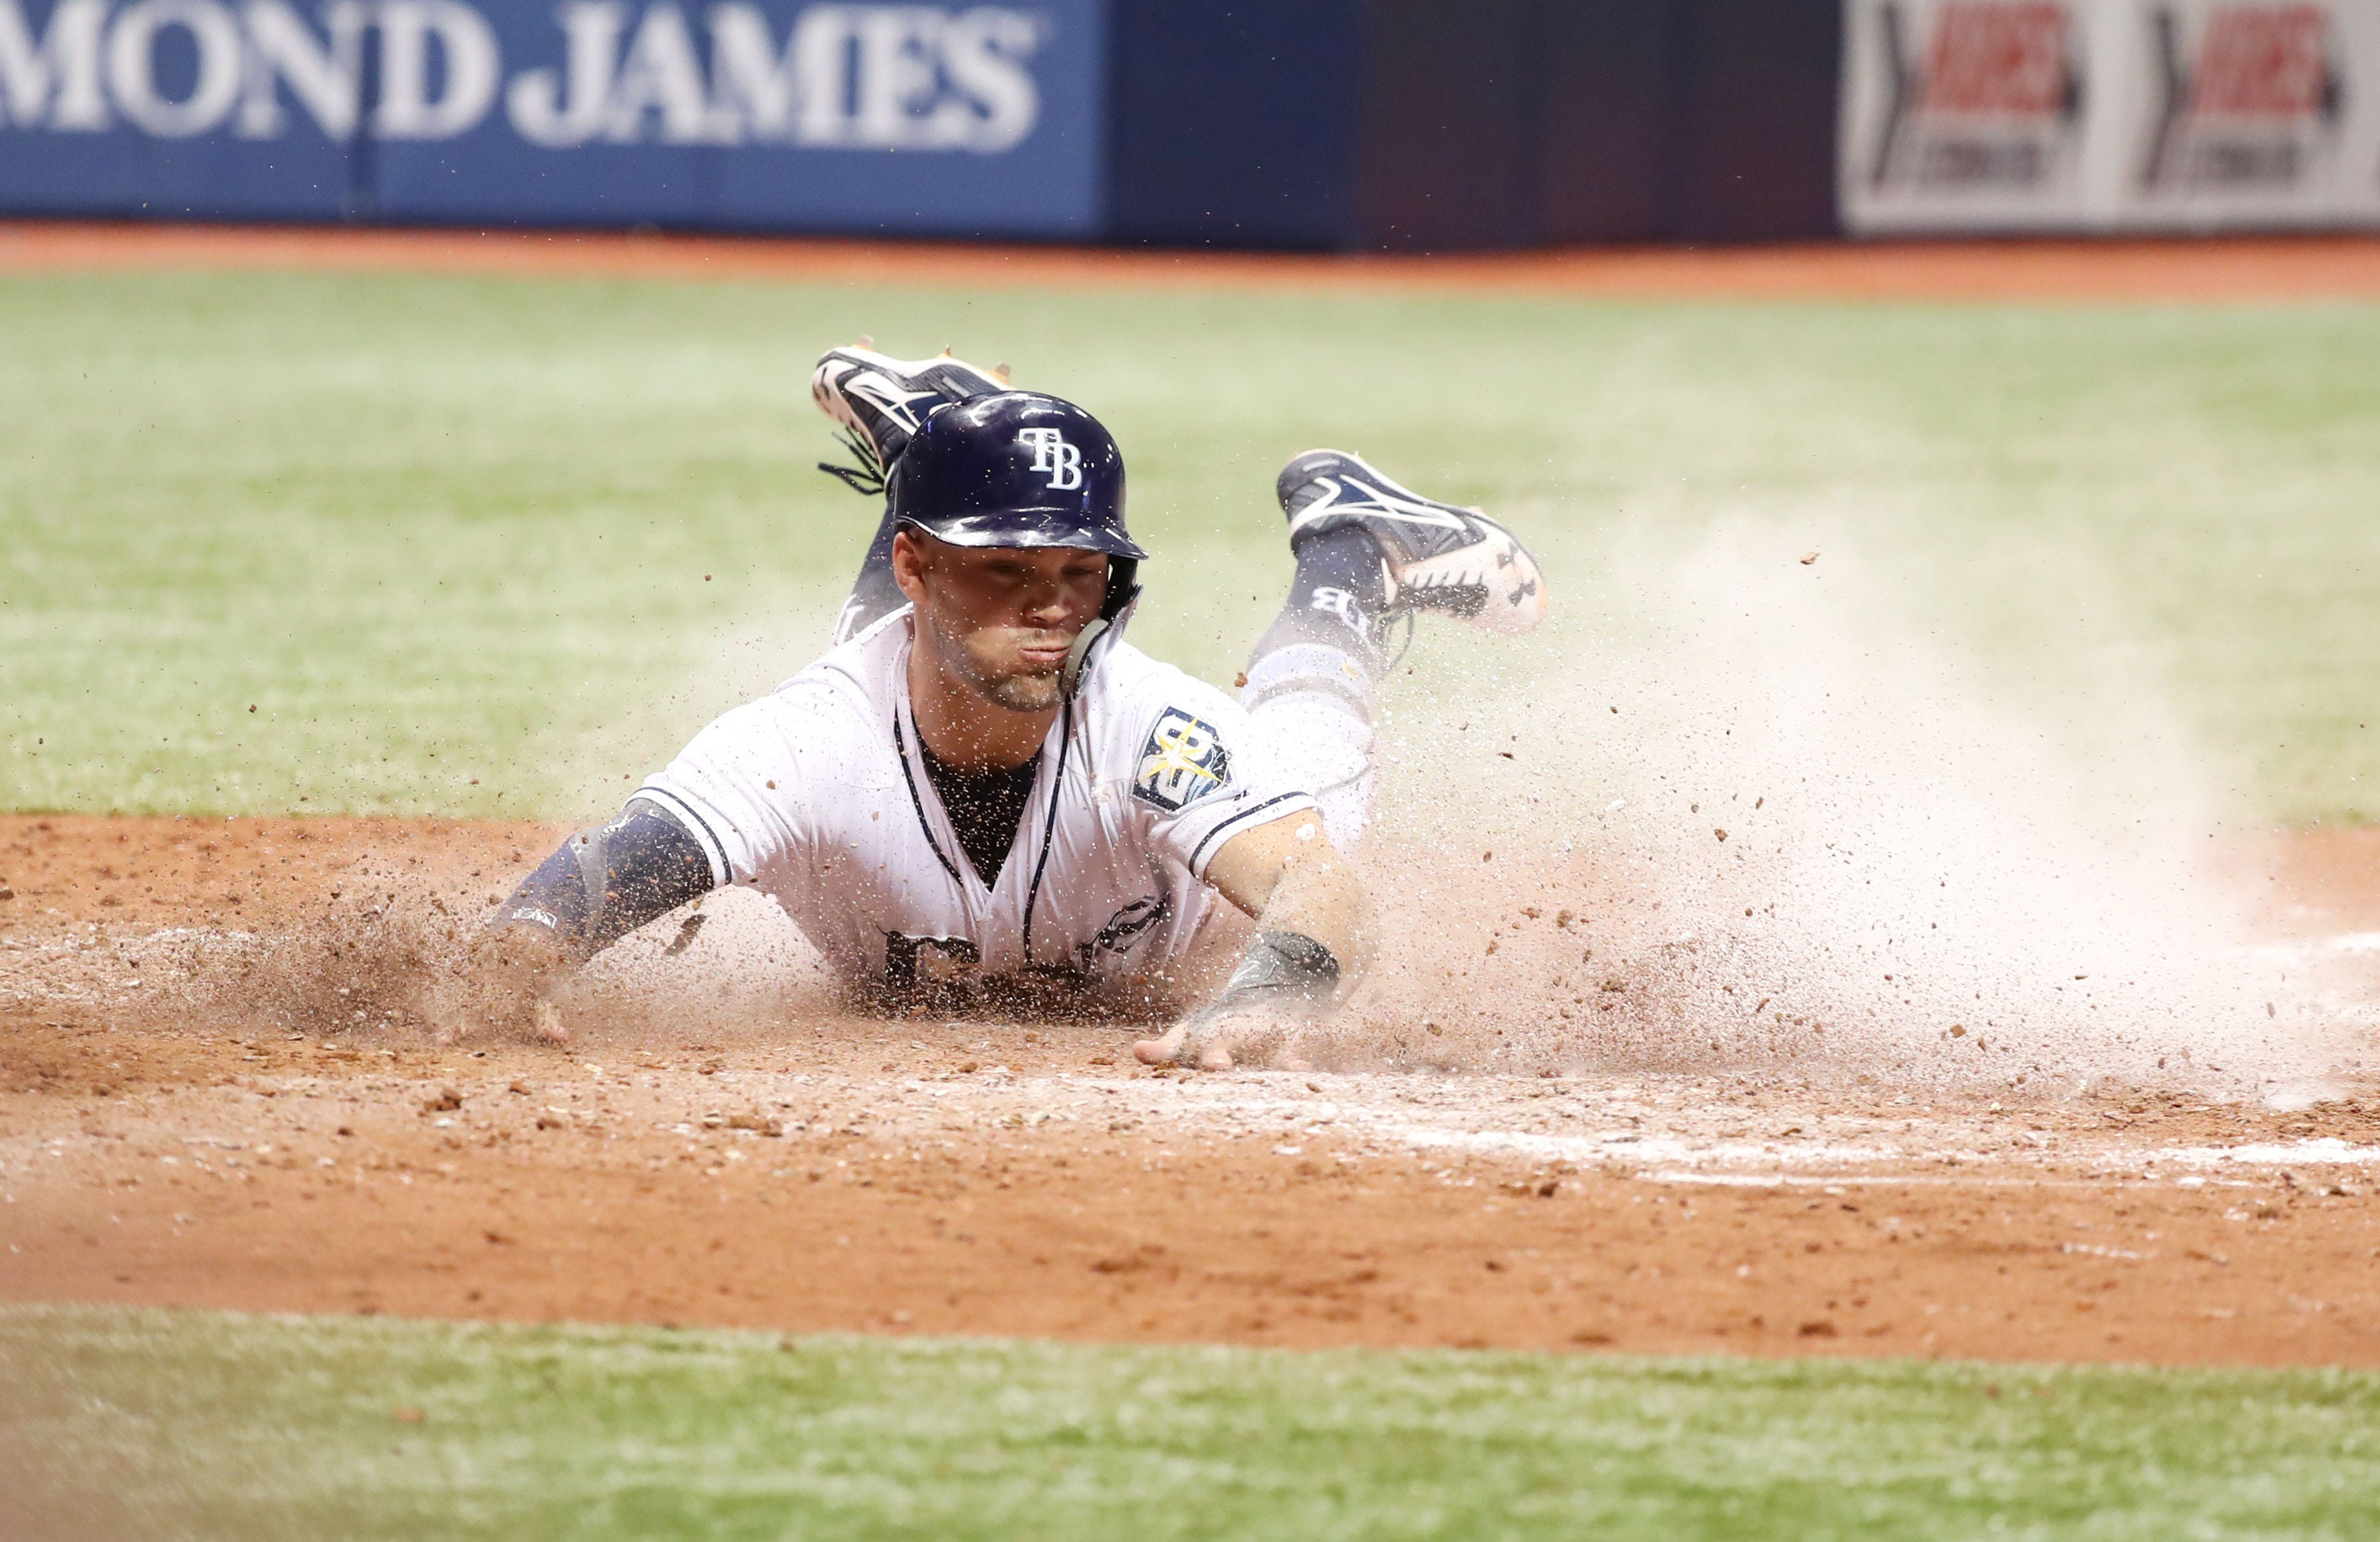 Tampa Bay Rays center fielder Johnny Field slides safe into home plate as he scores a run during the seventh inning against the Detroit Tigers  at Tropicana Field.